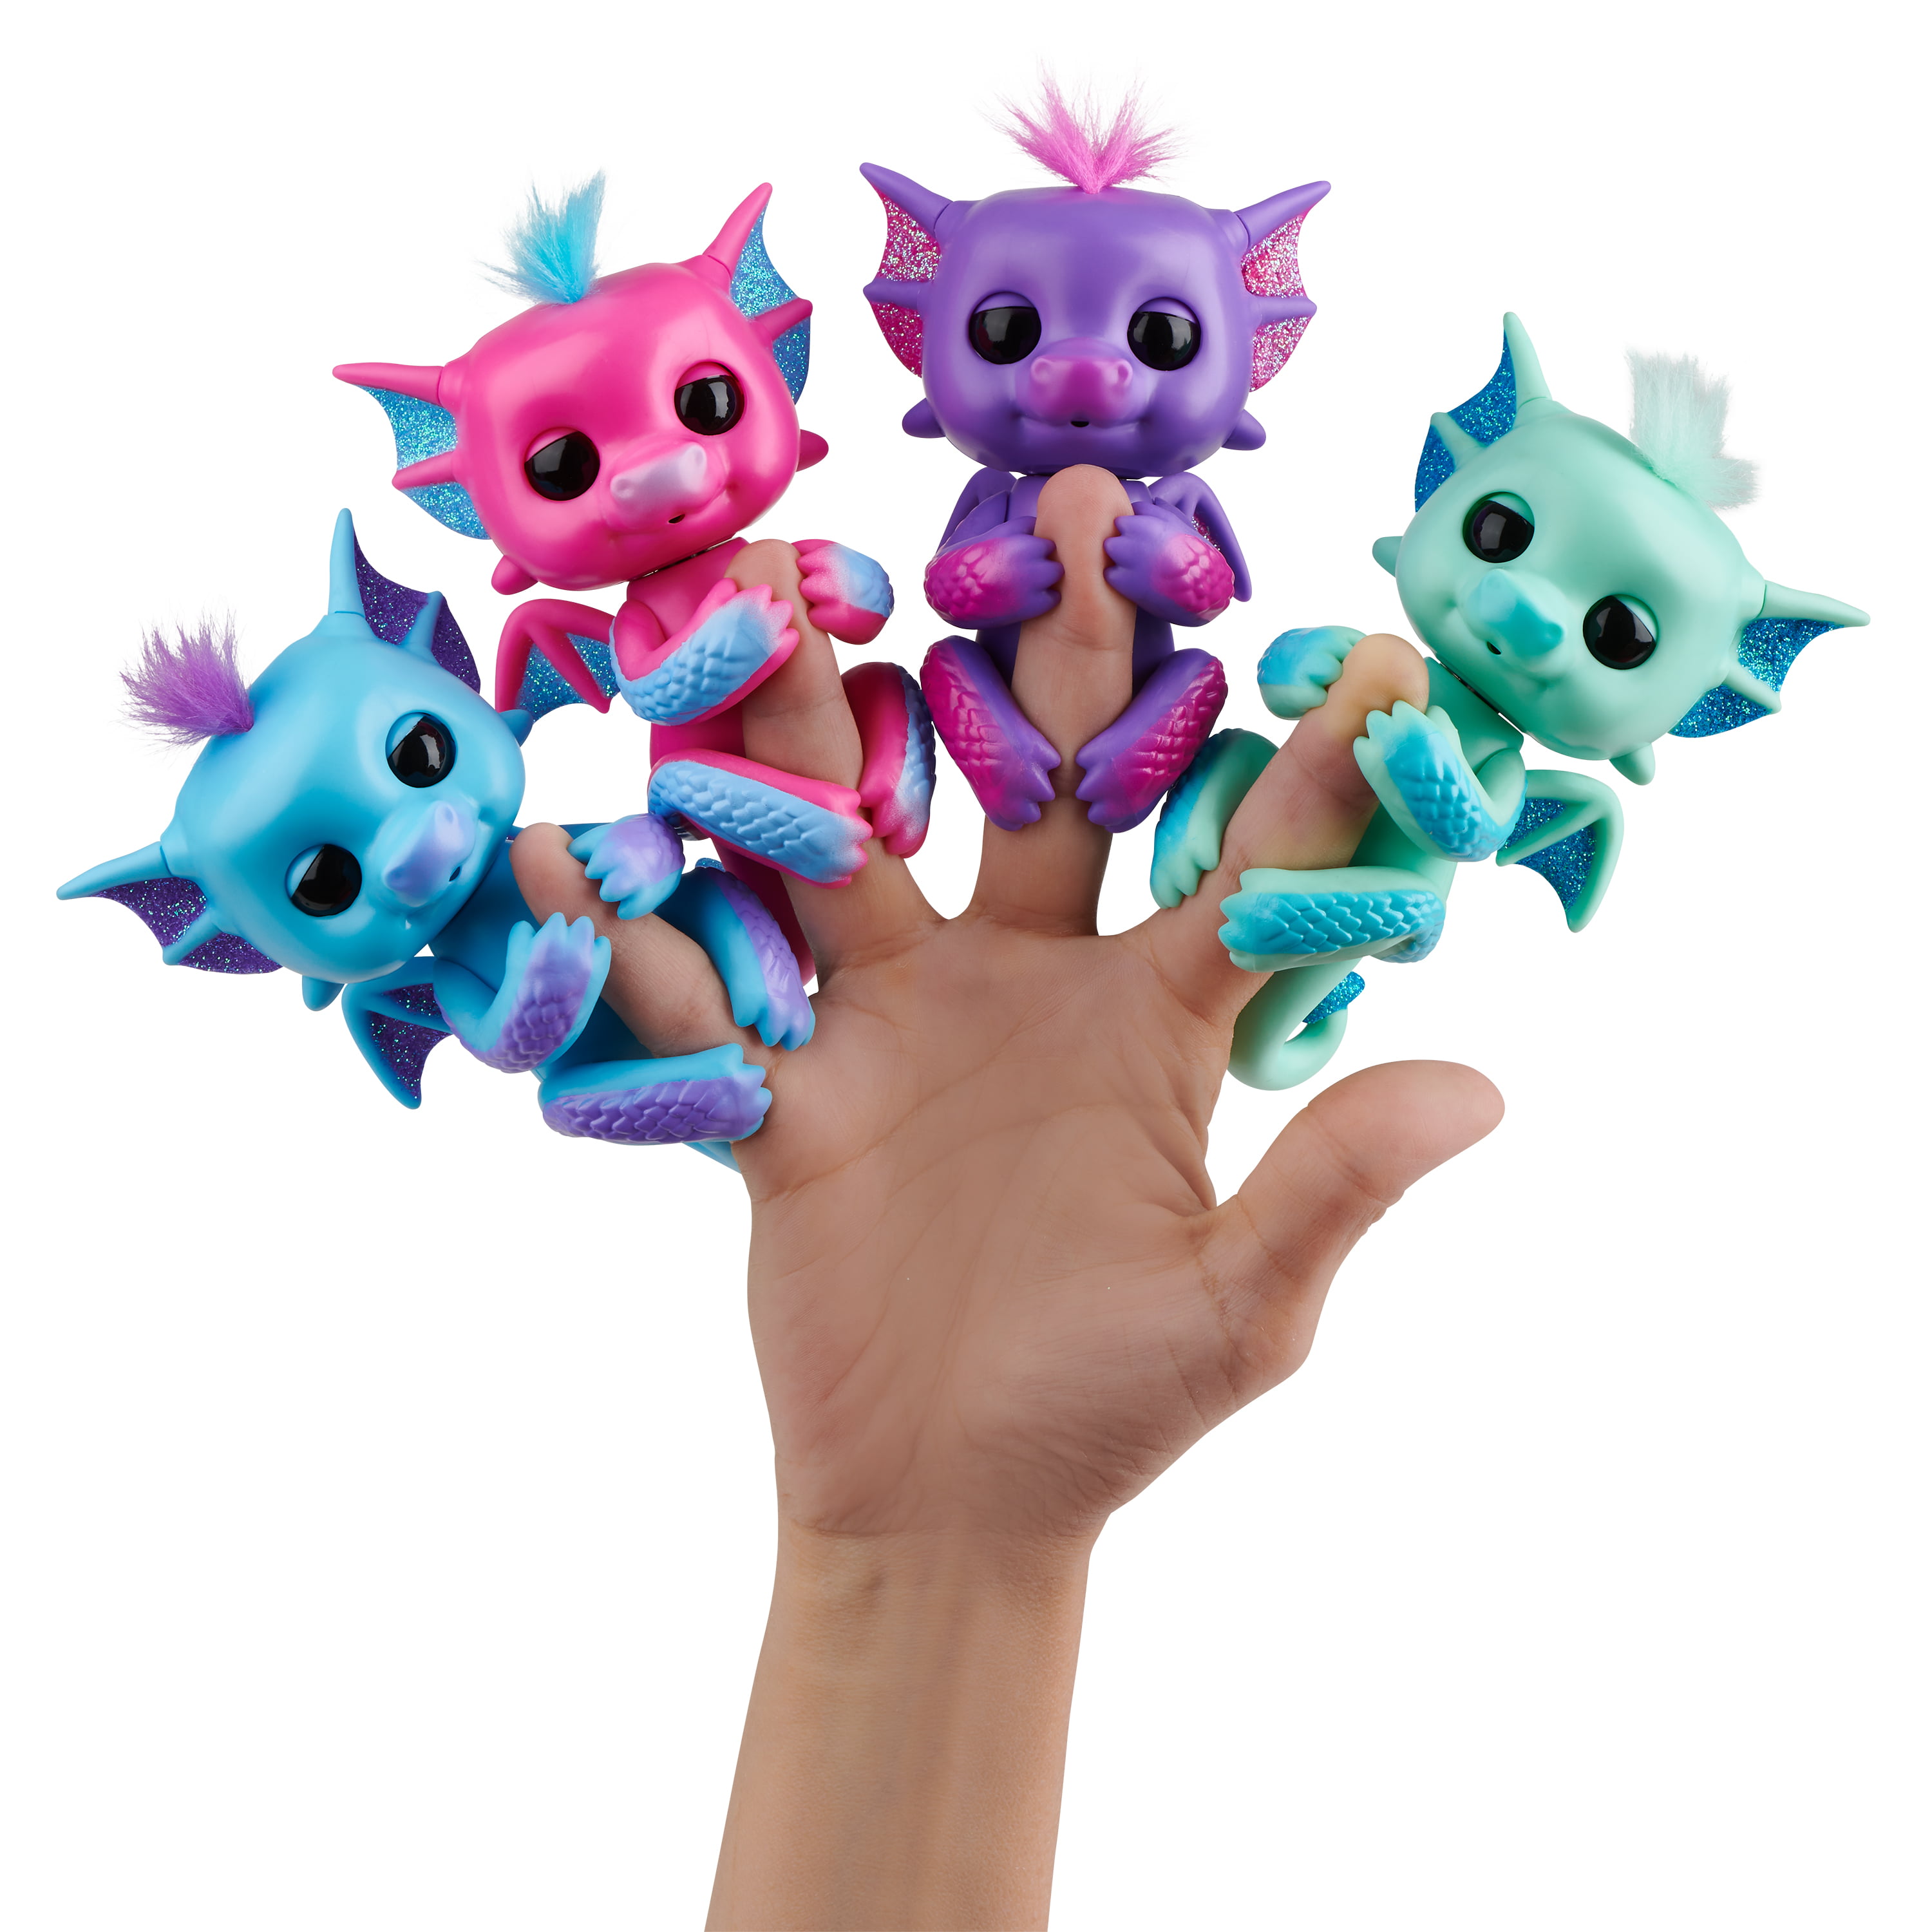 WowWee Fingerlings Kaylin Interactive Baby Dragon Purple Pink Age 5 A11 for sale online 